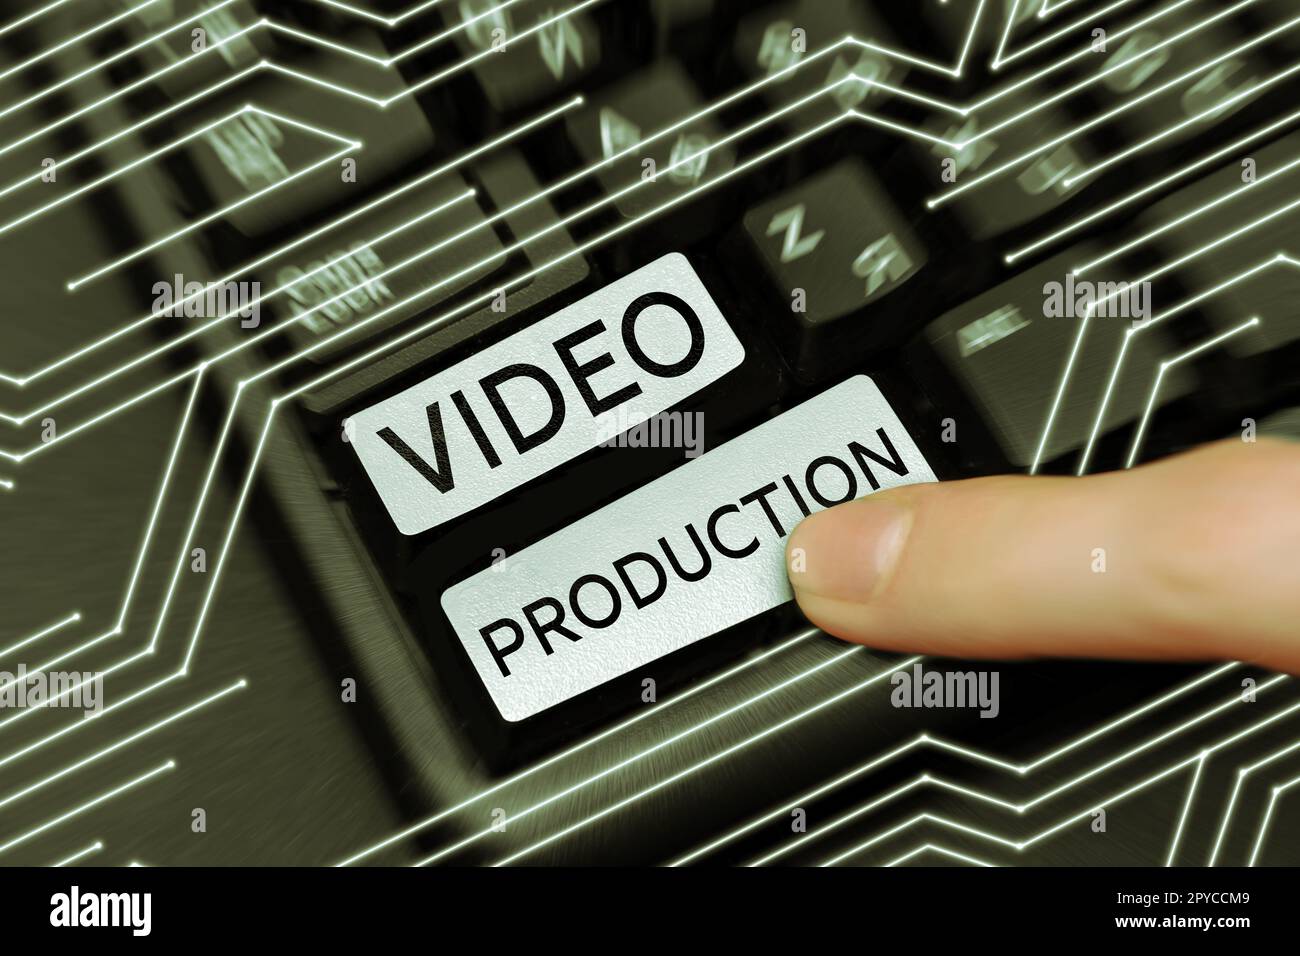 Handwriting text Video Production. Business overview process of converting an idea into a video Filmaking Stock Photo